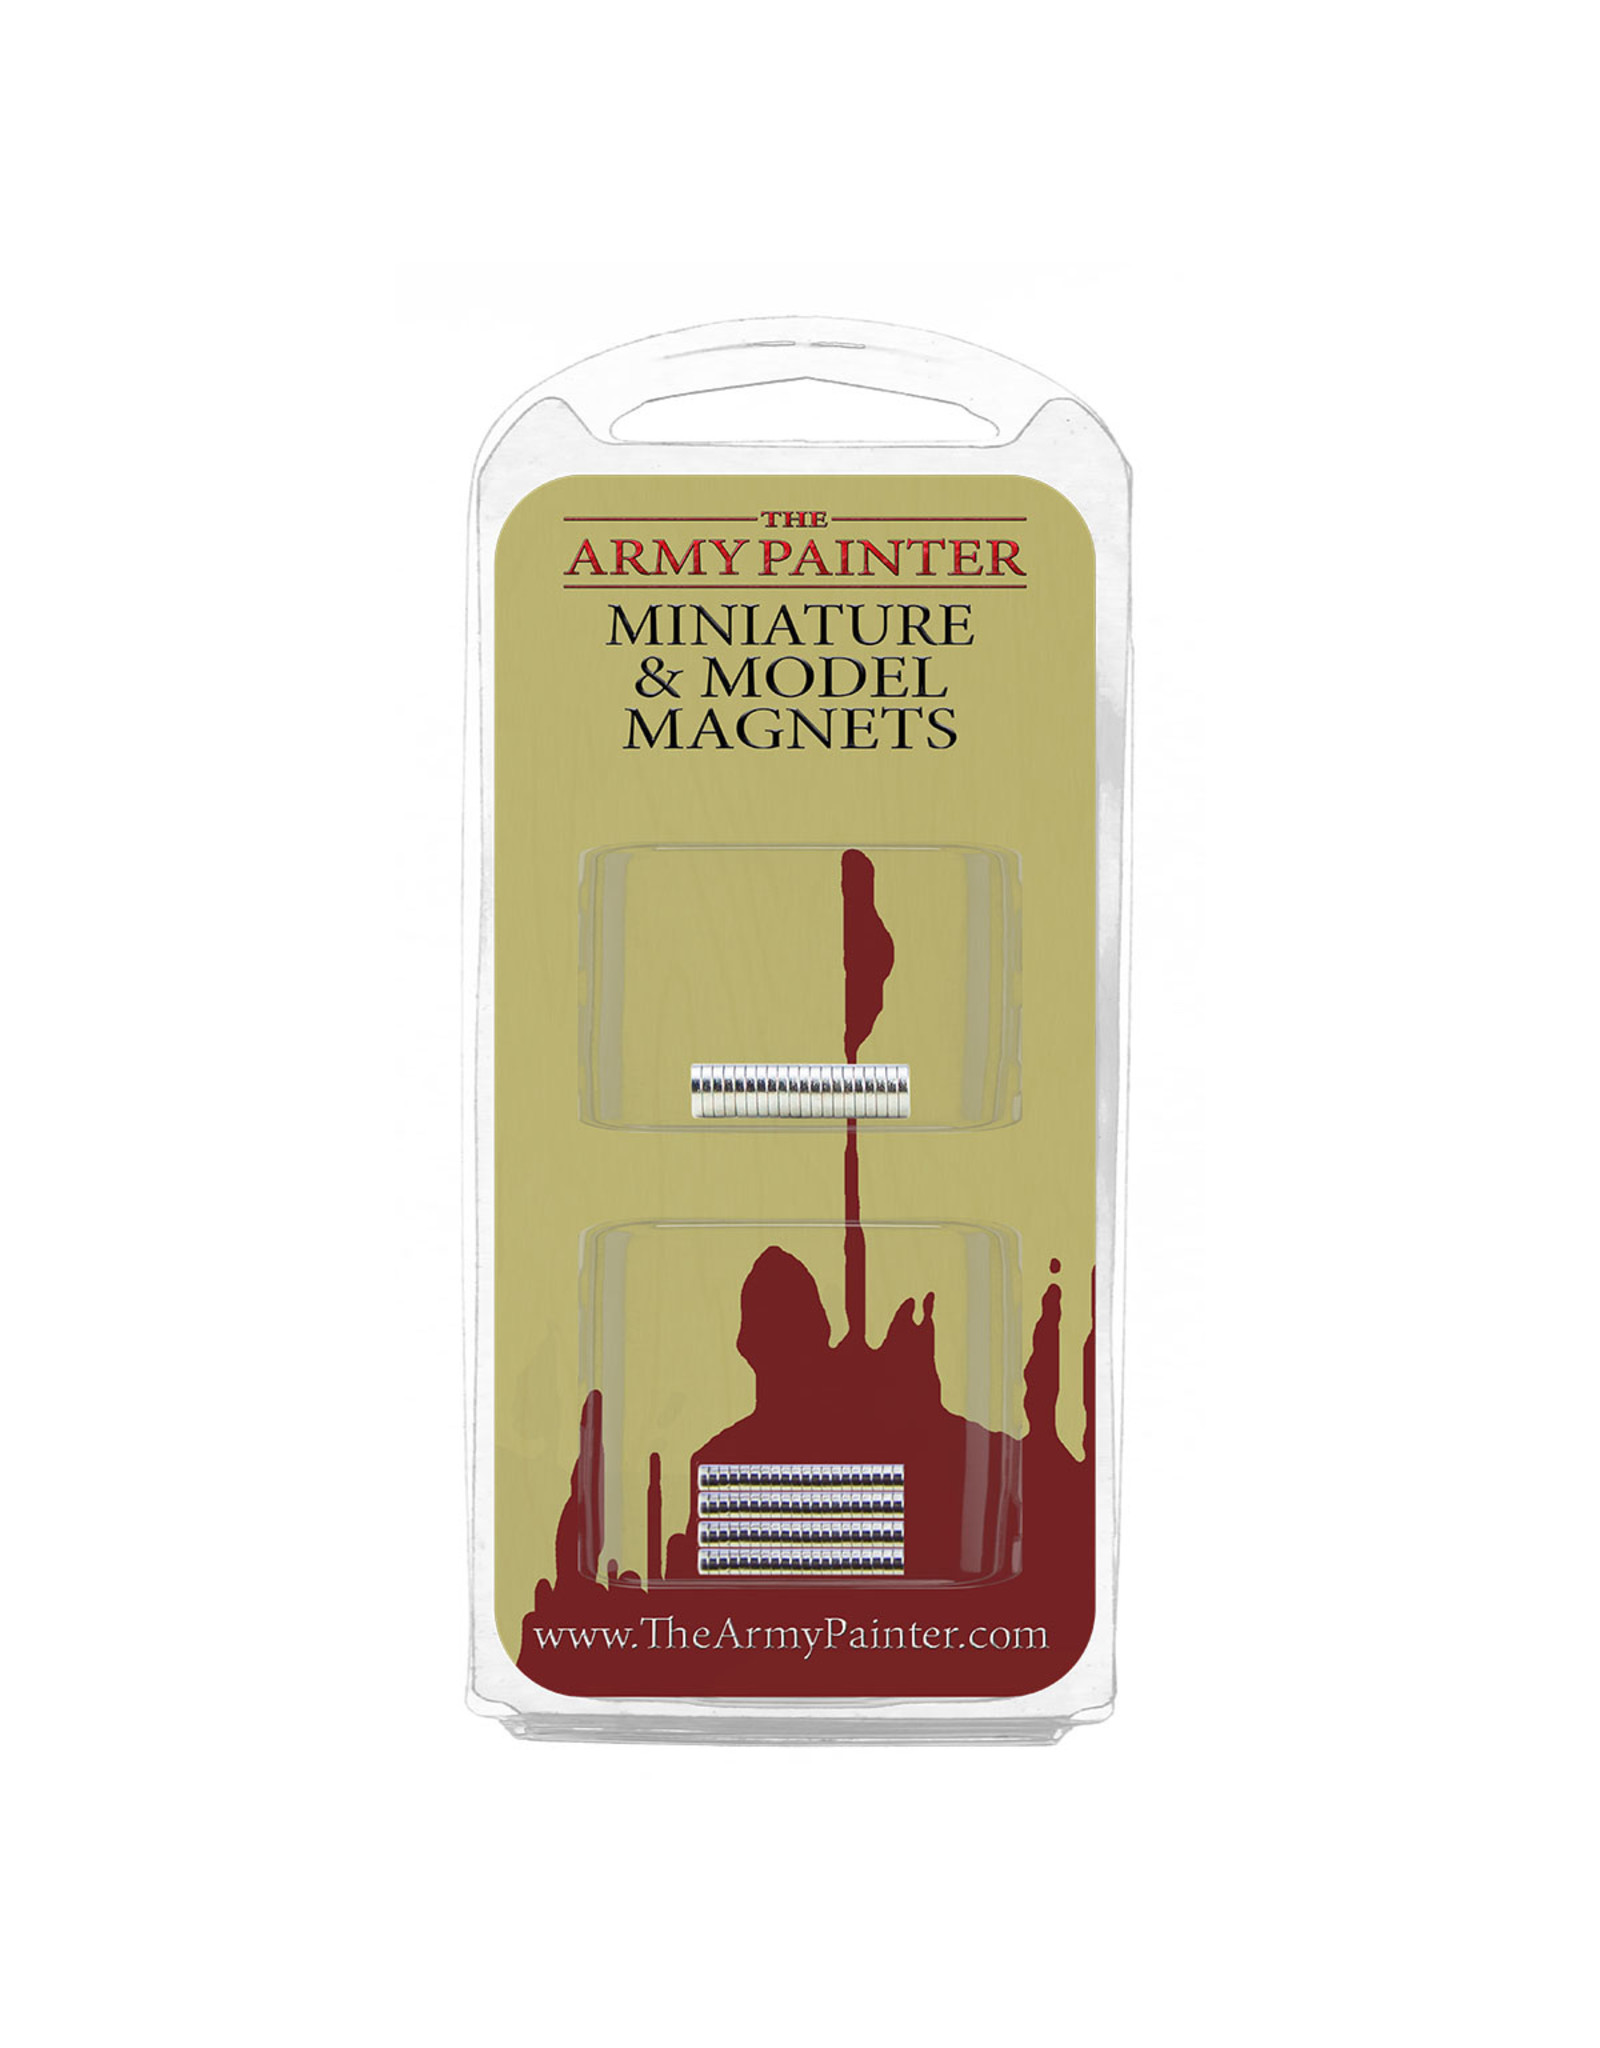 The Army Painter The Army Painter Miniature and Model Magnets